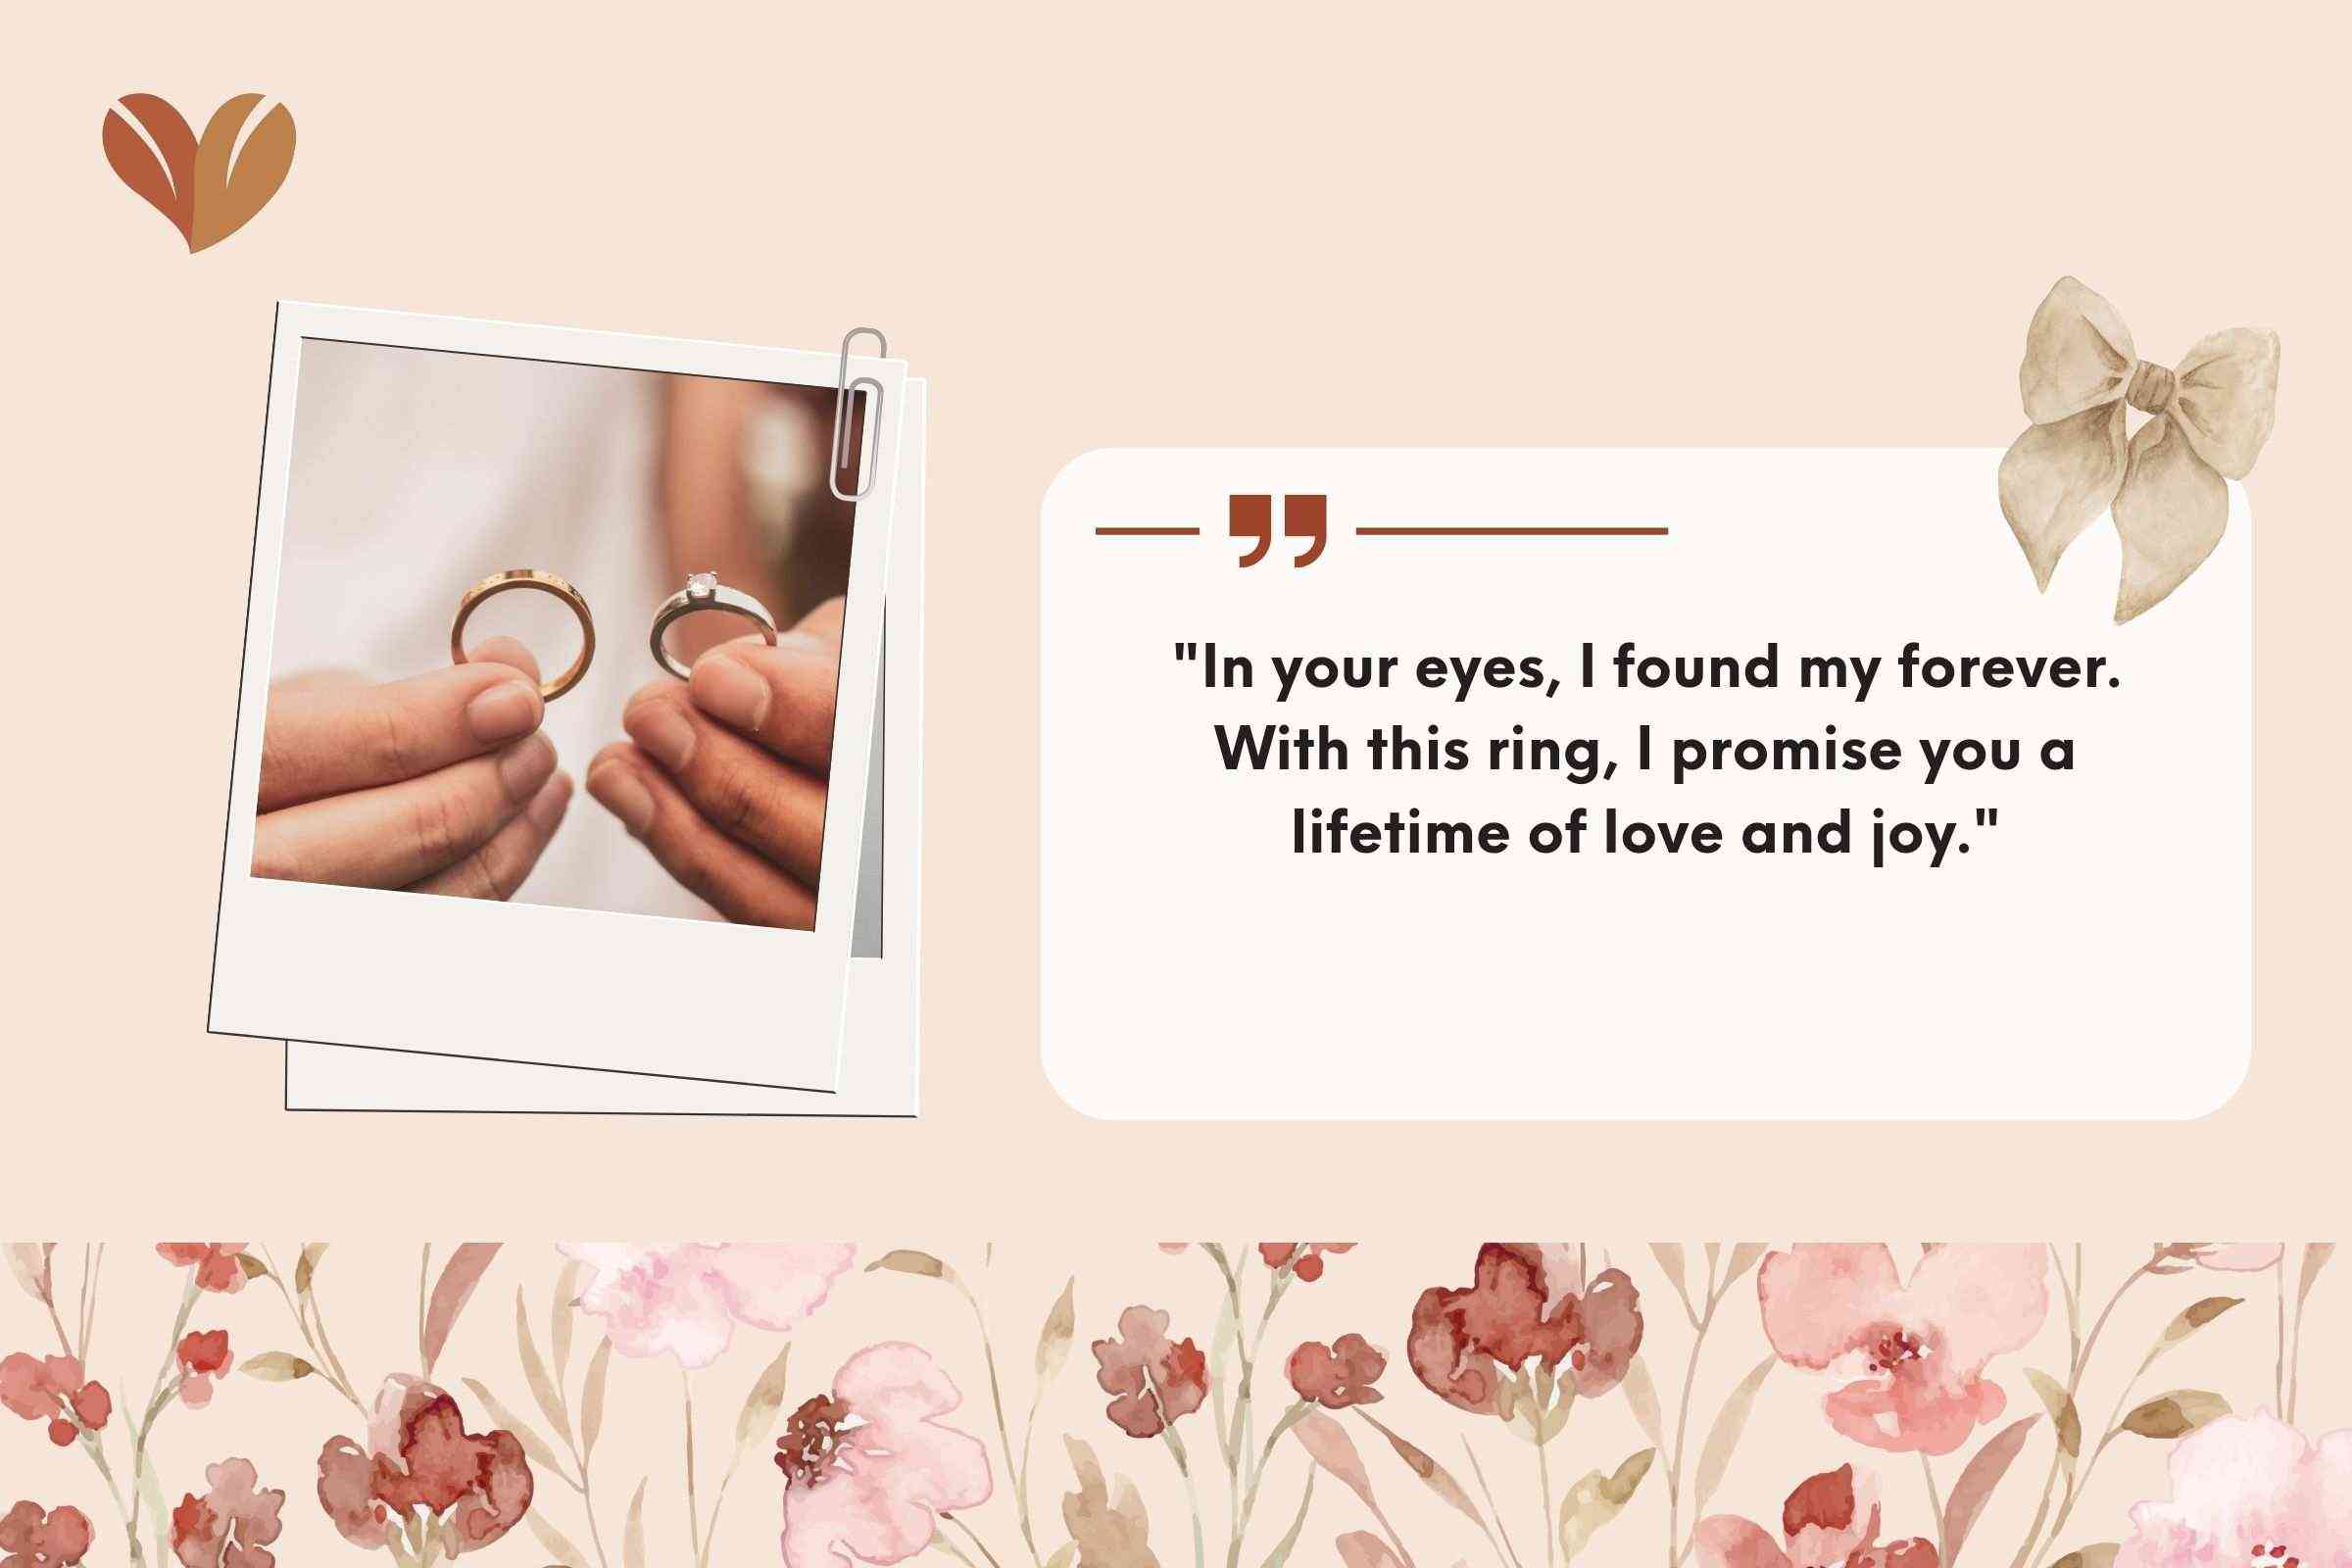 "In your eyes, I found my forever. With this ring, I promise you a lifetime of love and joy."